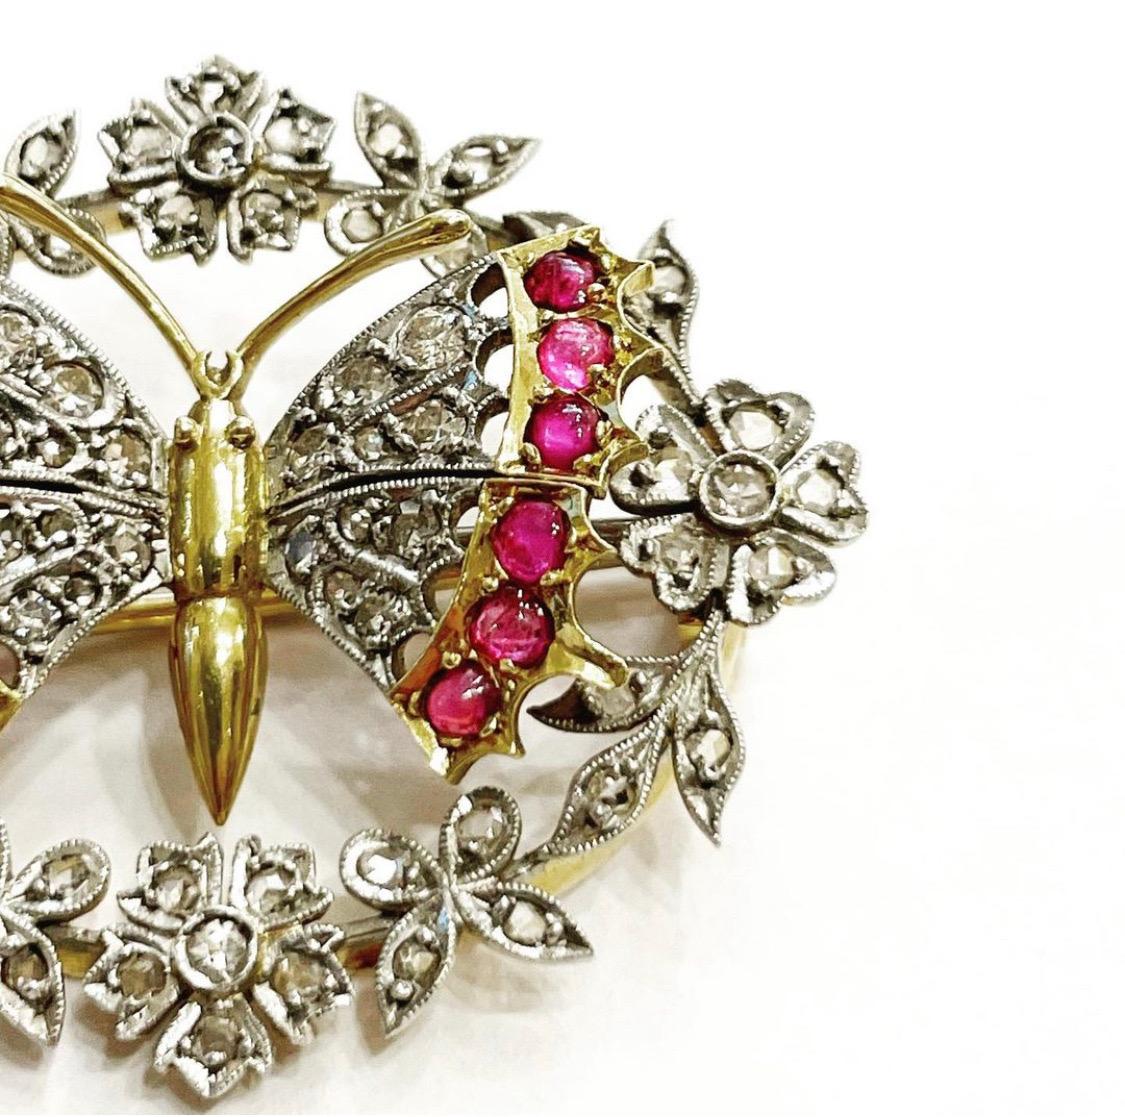 Amazing butterfly brooch with pave set with Diamonds and ruby cabochon .
Handmade 18k Yellow and White Gold.
Total diamonds: 1.6 carats.
Total rubys: 0.6 carats.
Weight: 9.74 gr.
Measure: 3.7 x 3.1 cm.
In original box. 

FREE SHIPPING .
RETURNS